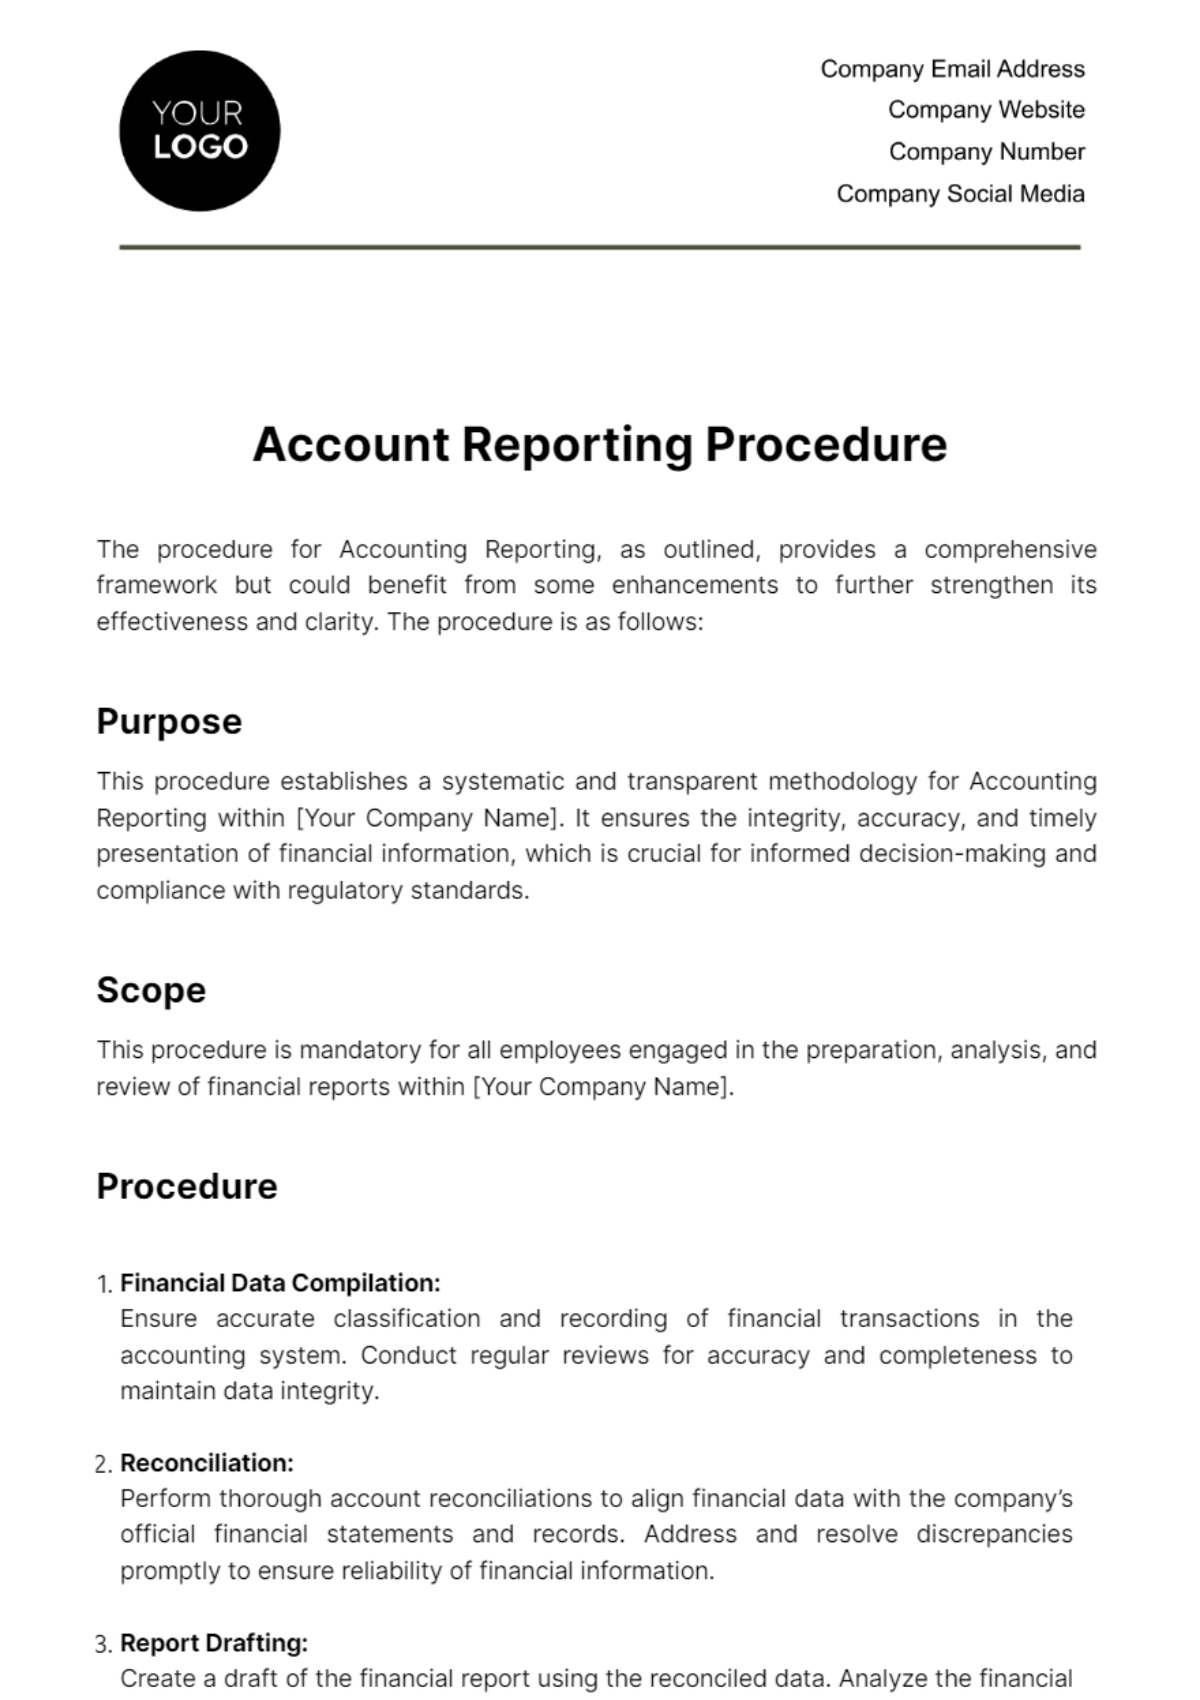 Free Account Reporting Procedure Template